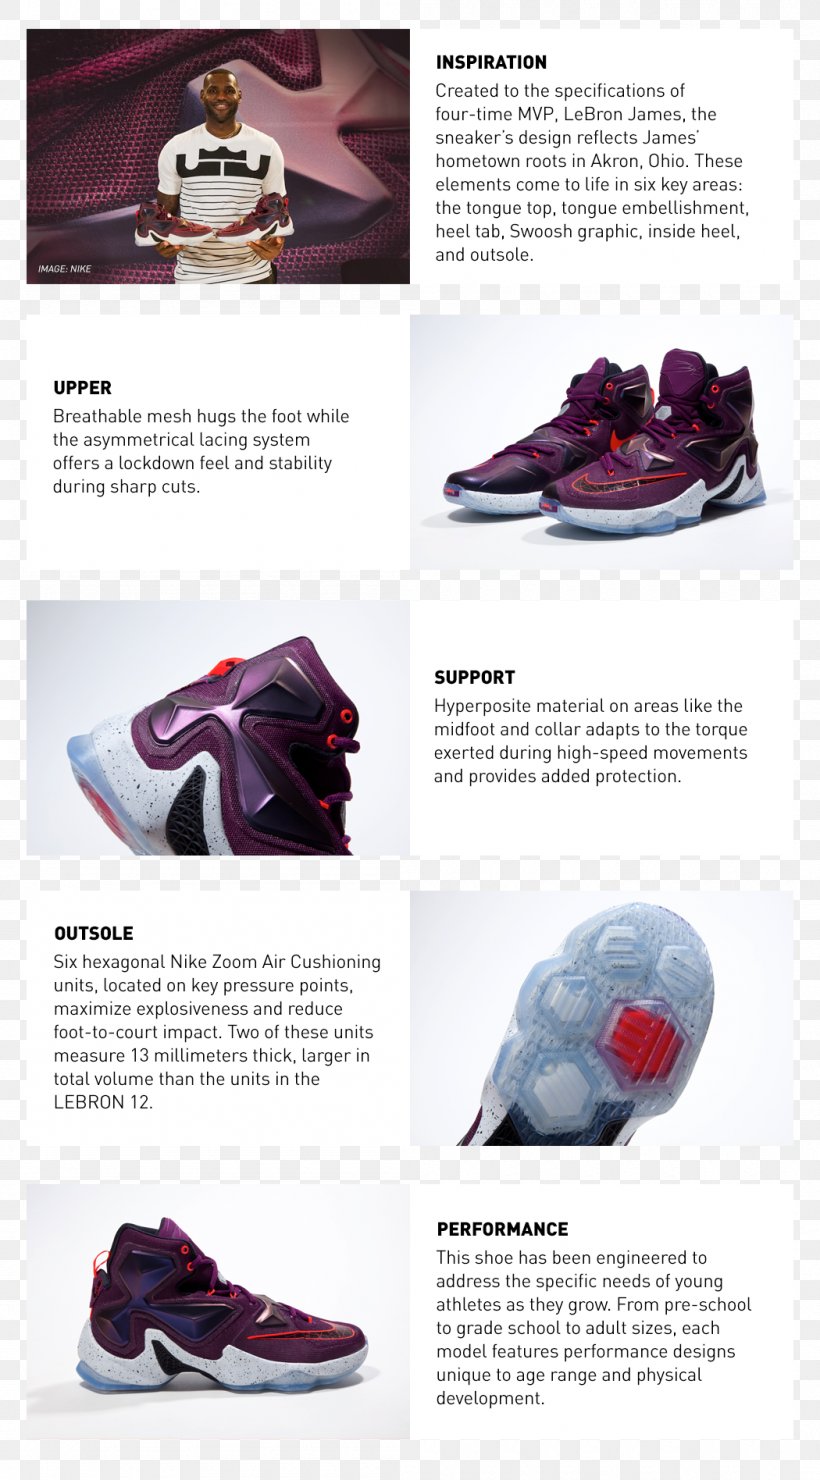 lebron james shoes all star 219